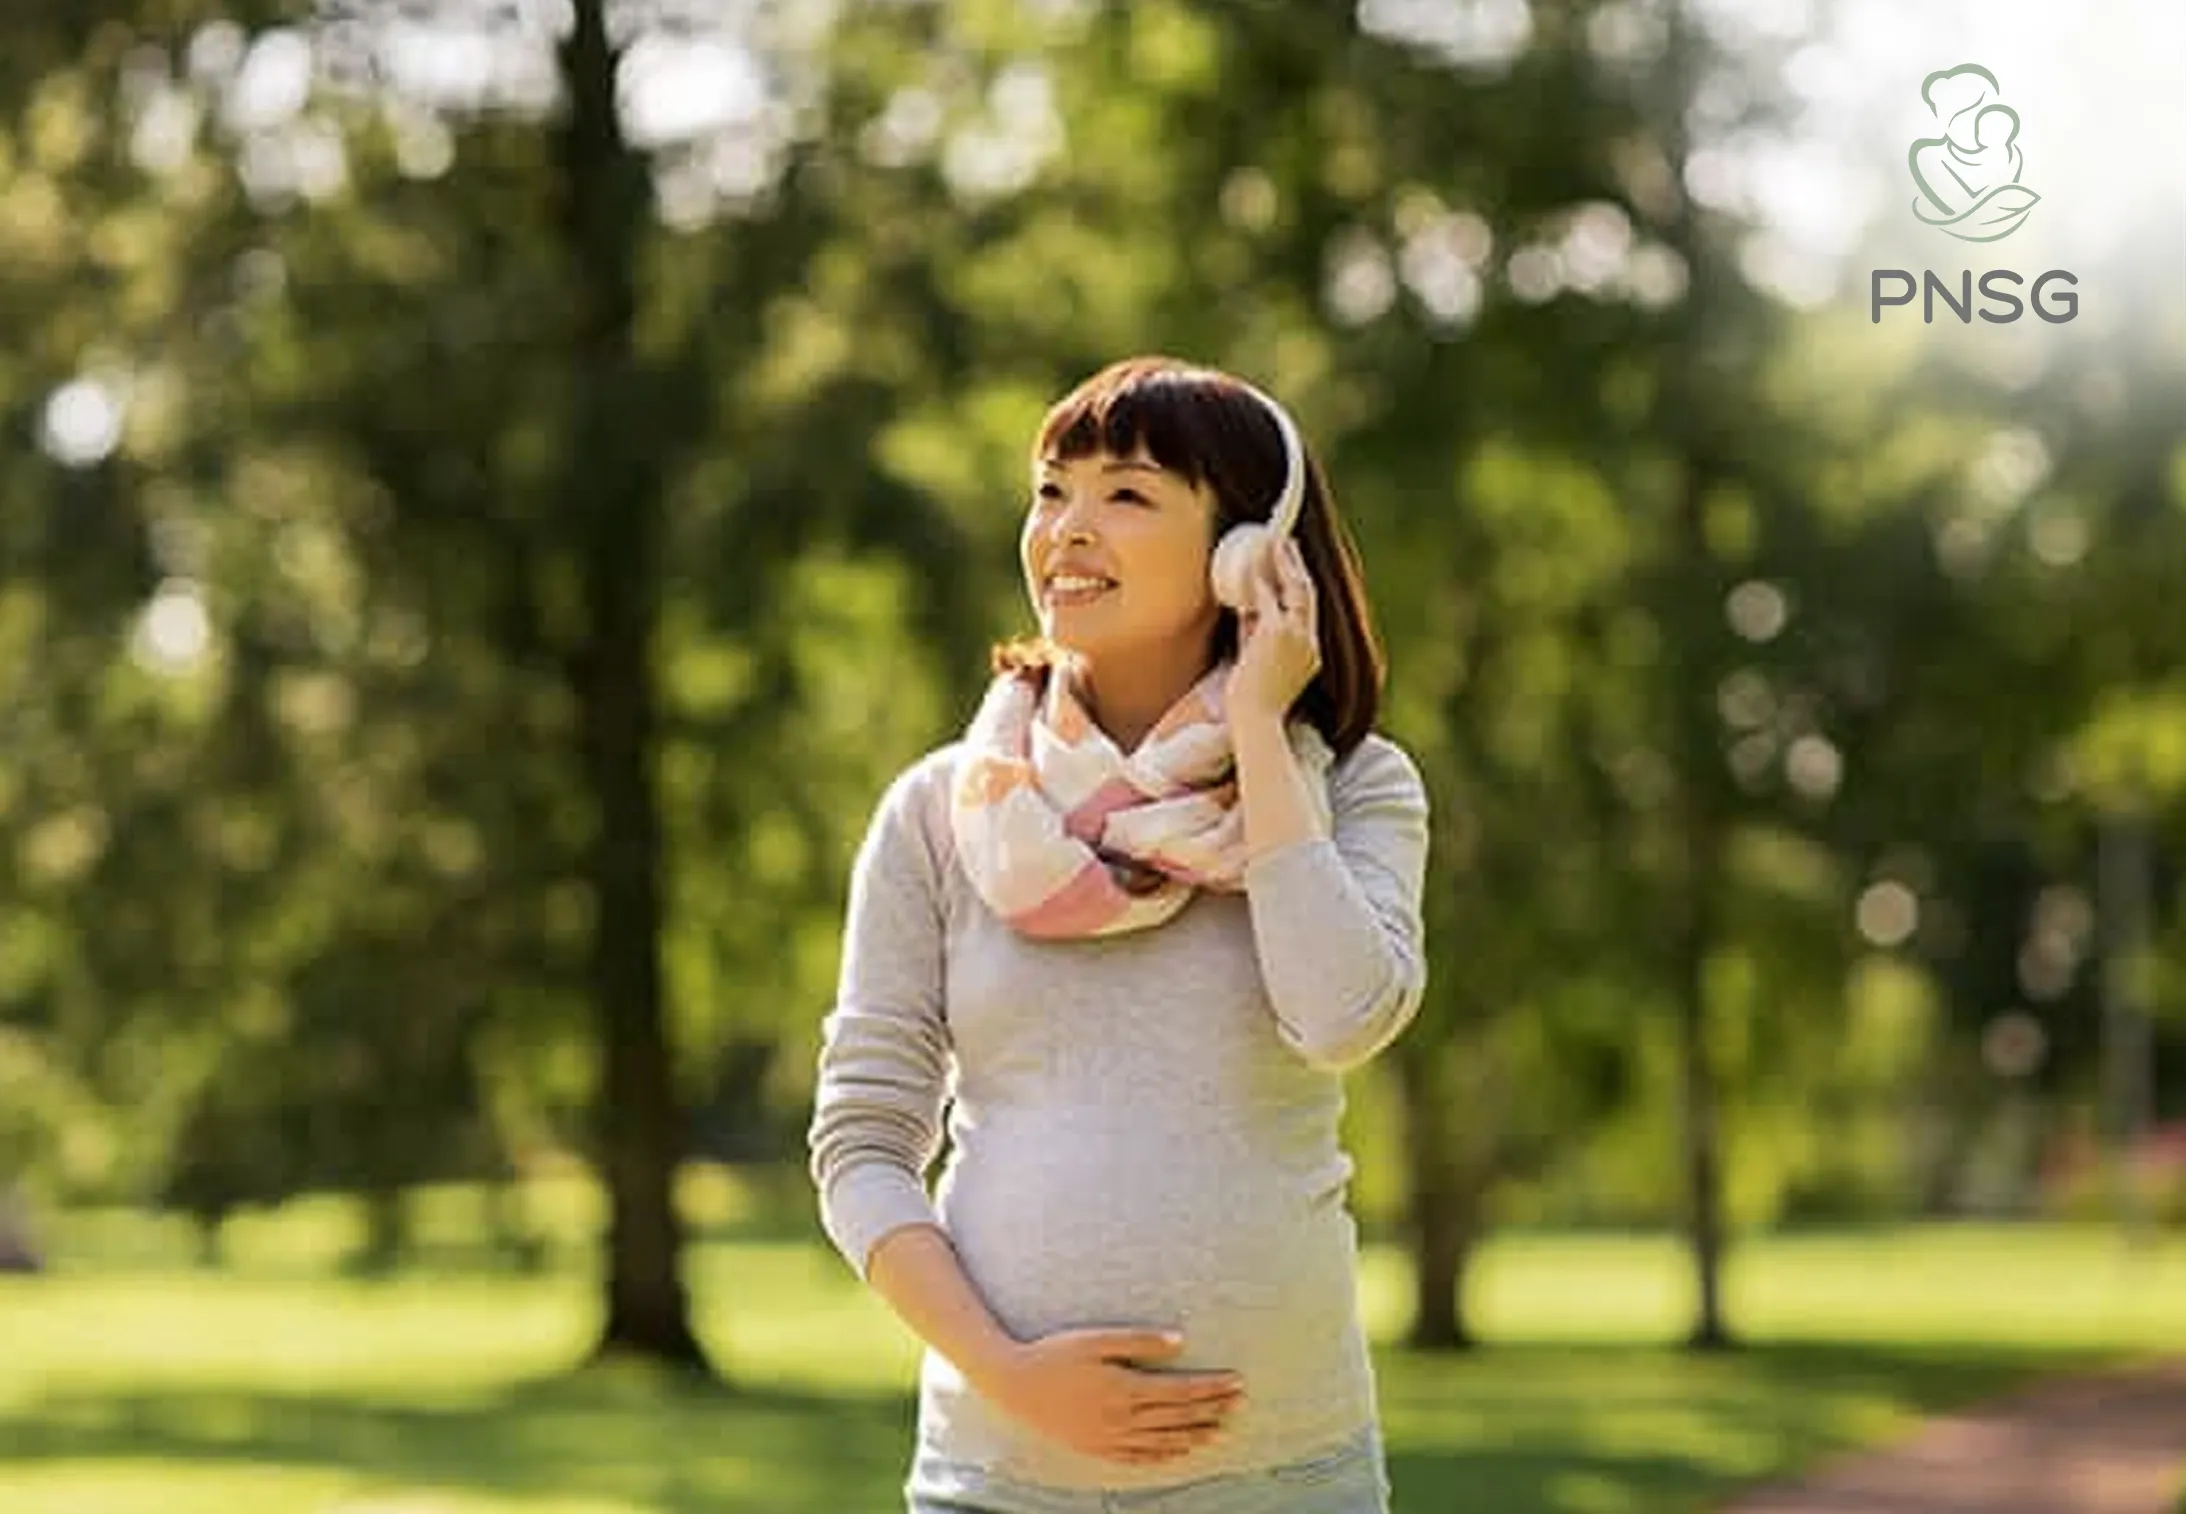 Ways To Relieve Pregnancy And Labour-related Stress And Pain - PNSG